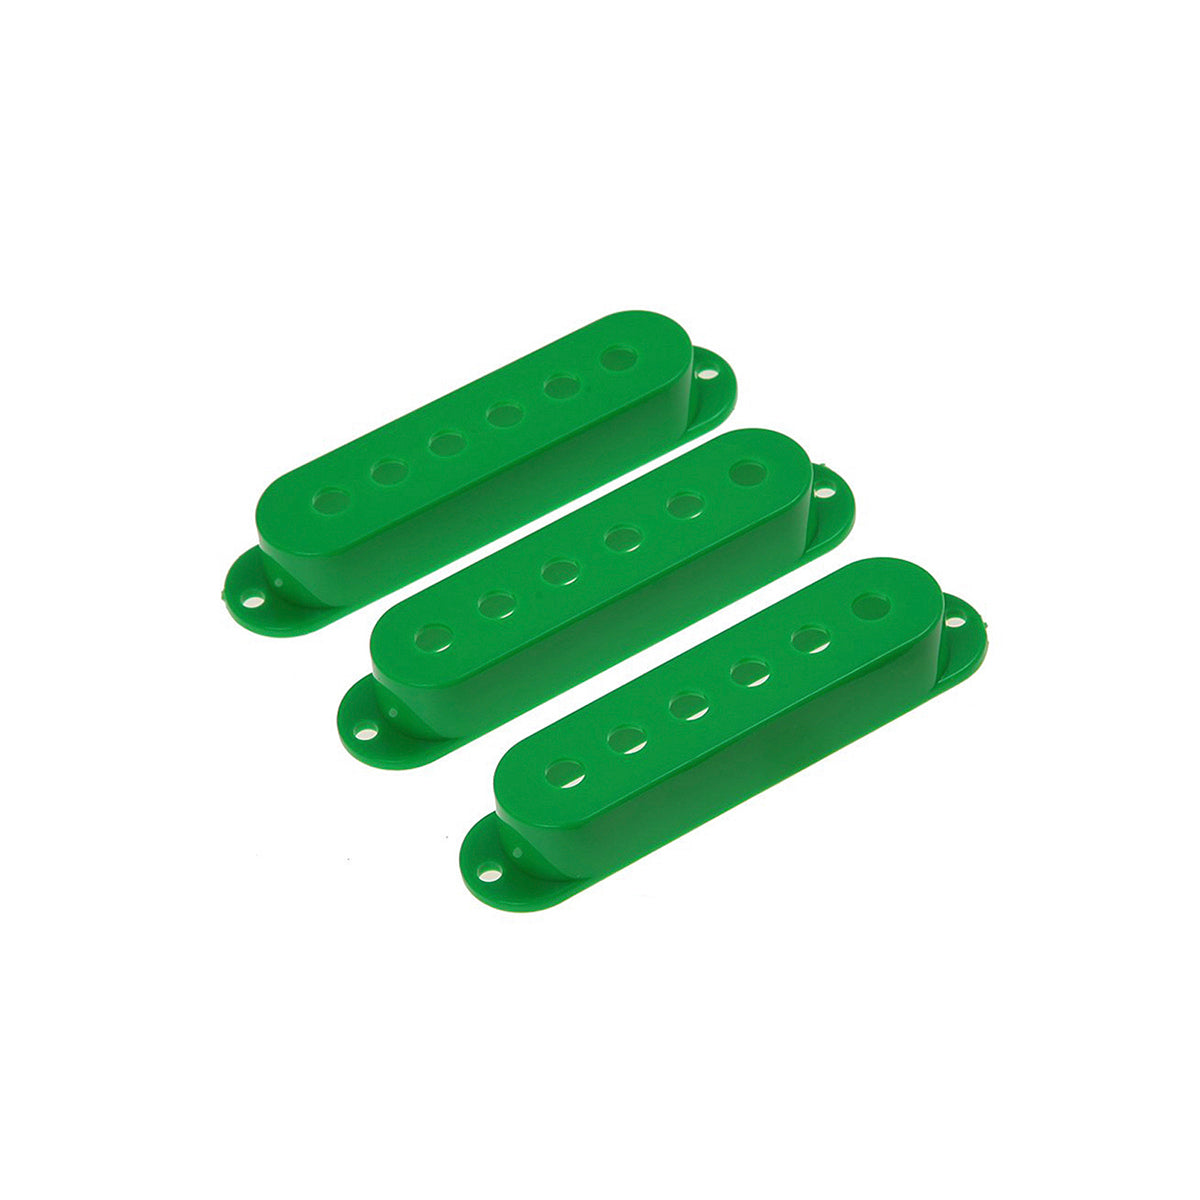 Musiclily 52mm Plastic Strat Style Guitar Single Coil Pickup Cover Set, Green (3 Pieces)